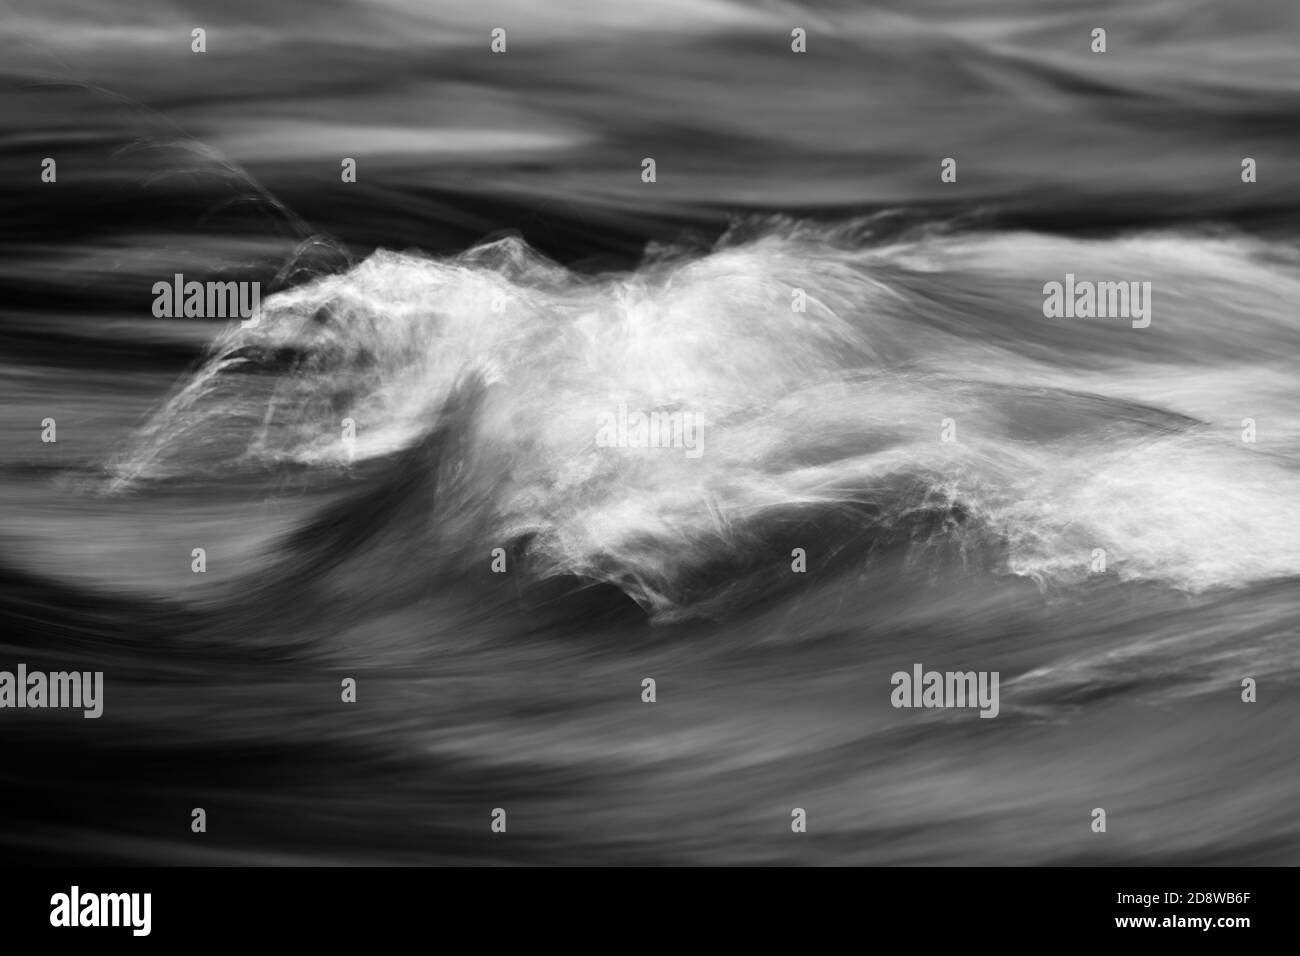 Detail view of flowing water of a small river, high-contrast black and white image, flowing structure, long time exposure, narrow focus zone Stock Photo